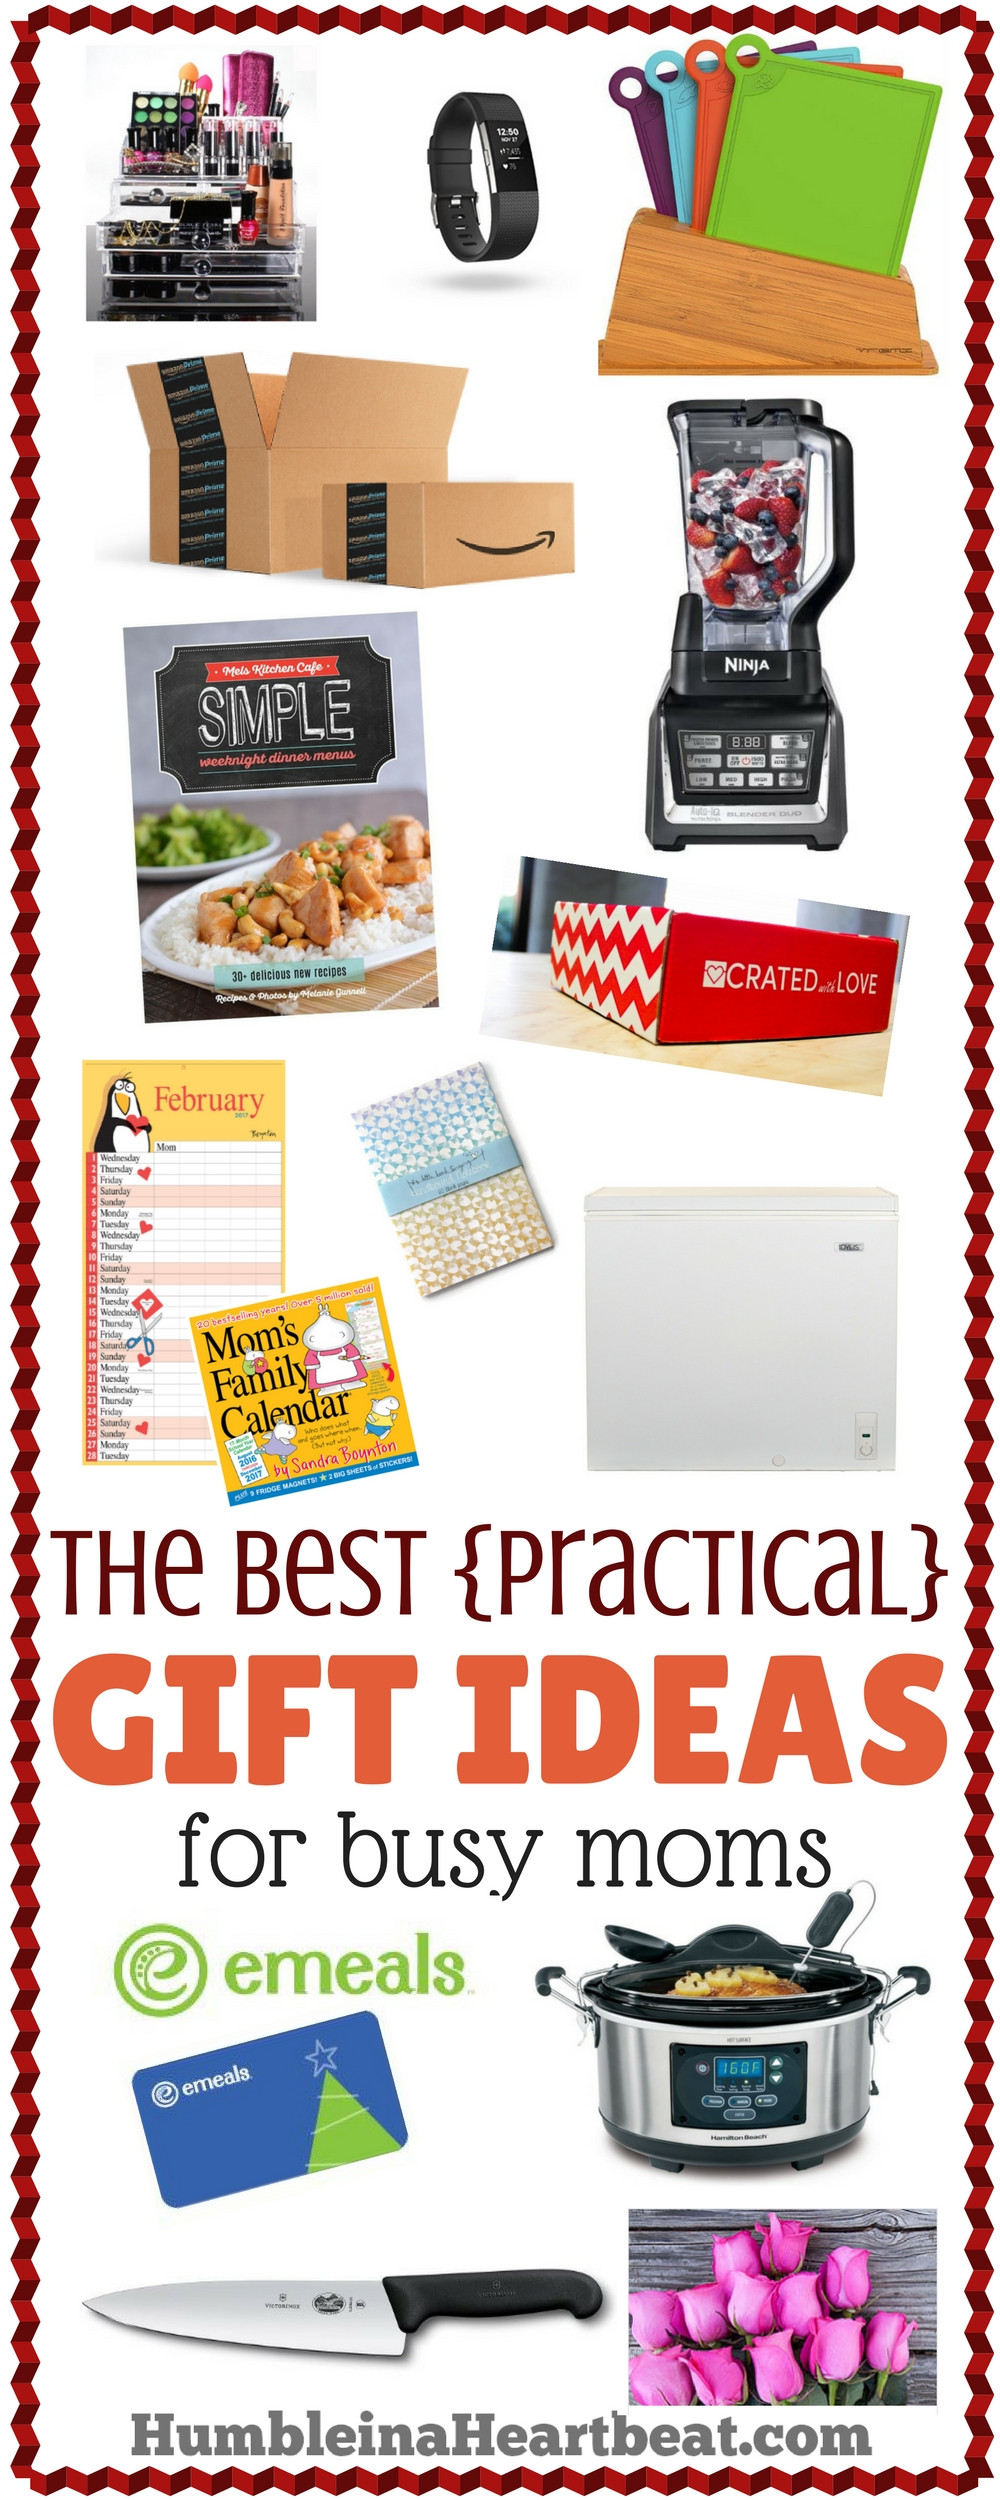 Practical Mother'S Day Gift Ideas
 The Ultimate Gift Guide for Practical Busy Moms